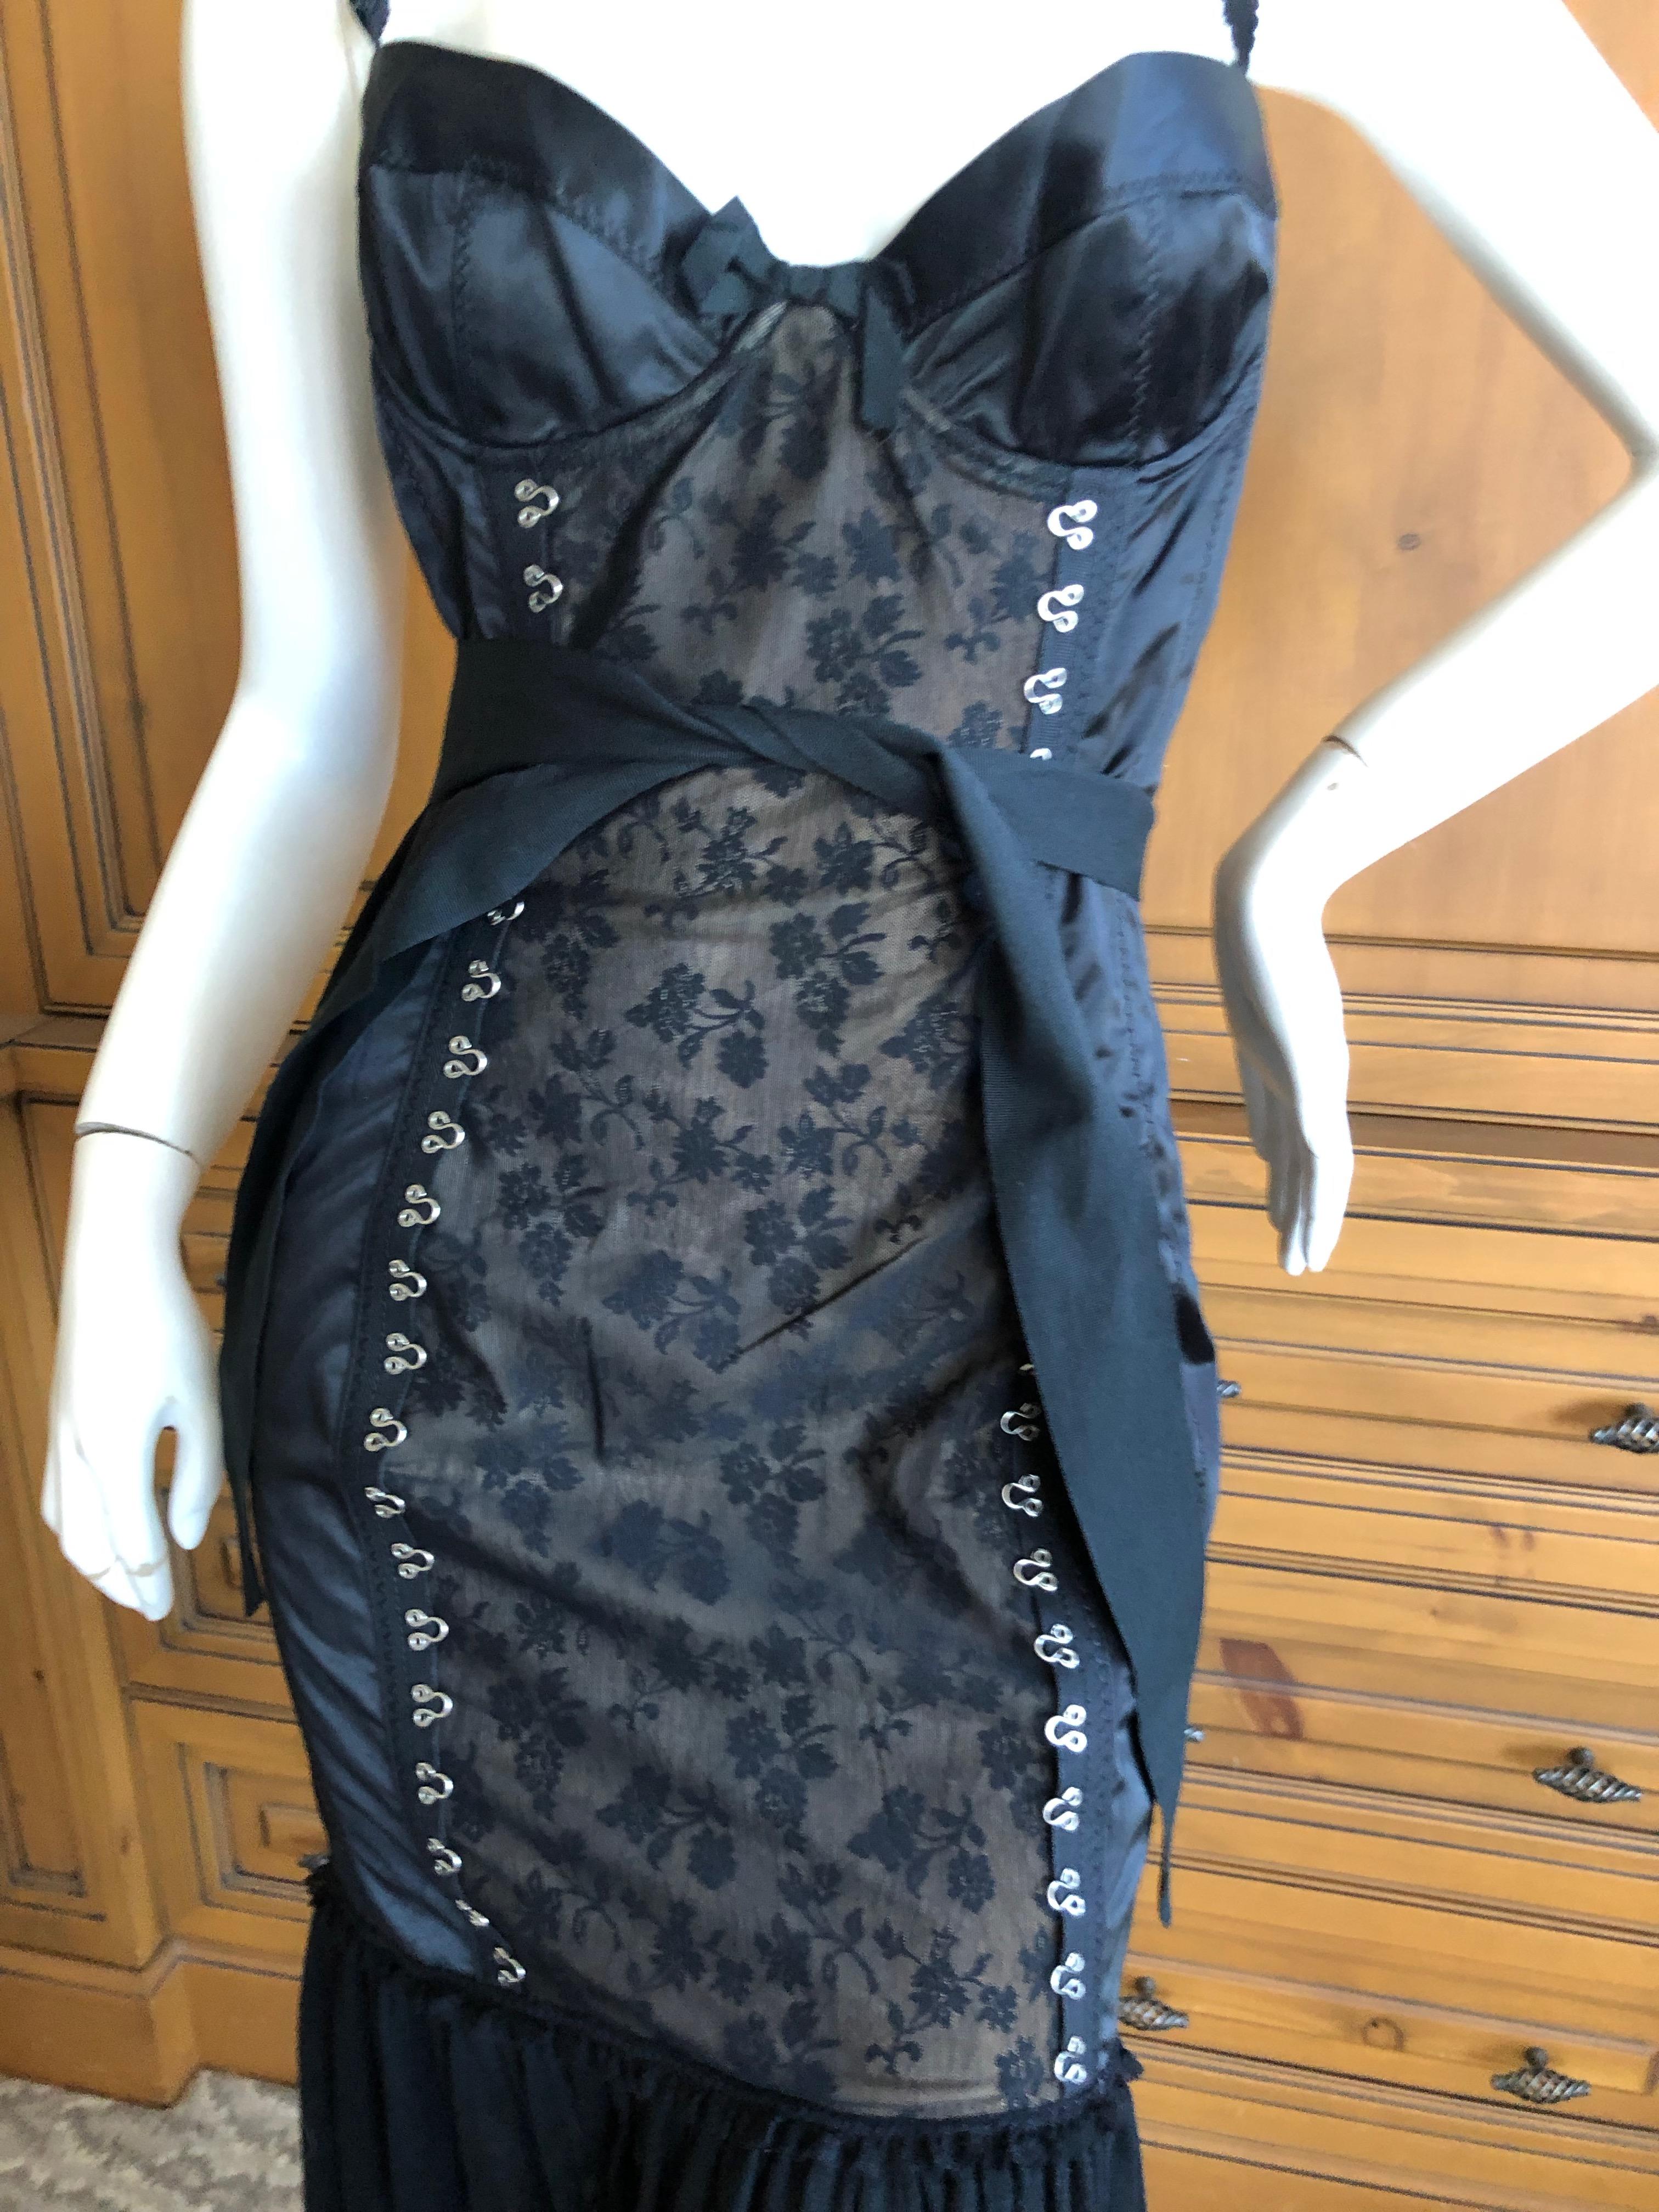 Moschino Cheap & Chic Vintage Black Lace Trim Dress with Corset Stay Details, and matching jacket
 New with tags

Size 10 US,but runs more like a 6, lots of stretch

Bust 34